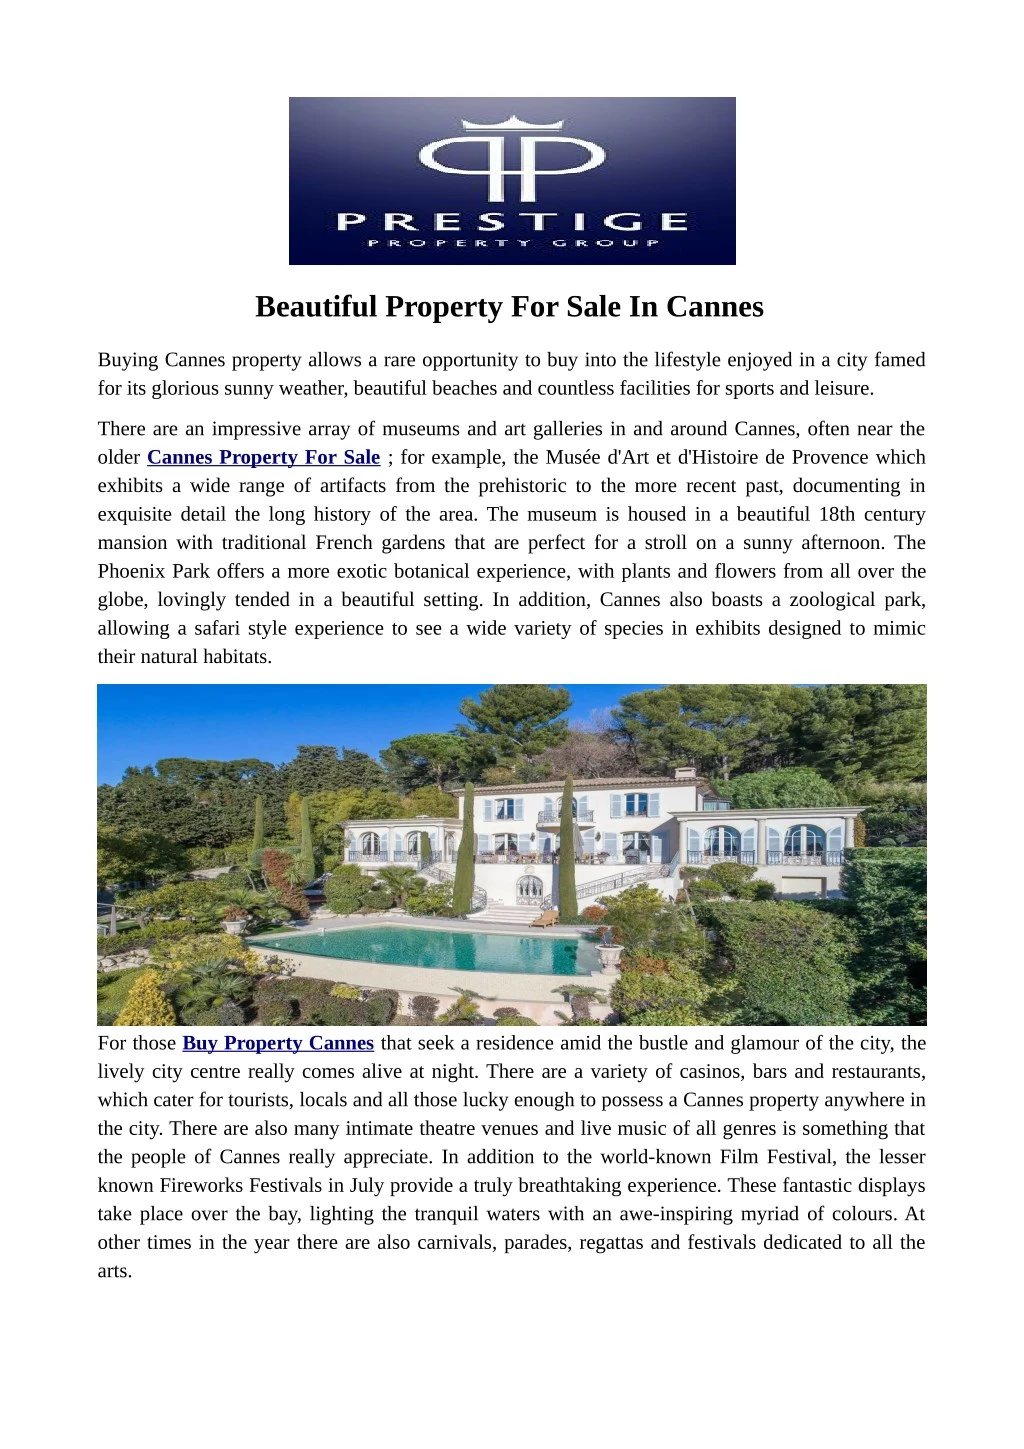 beautiful property for sale in cannes